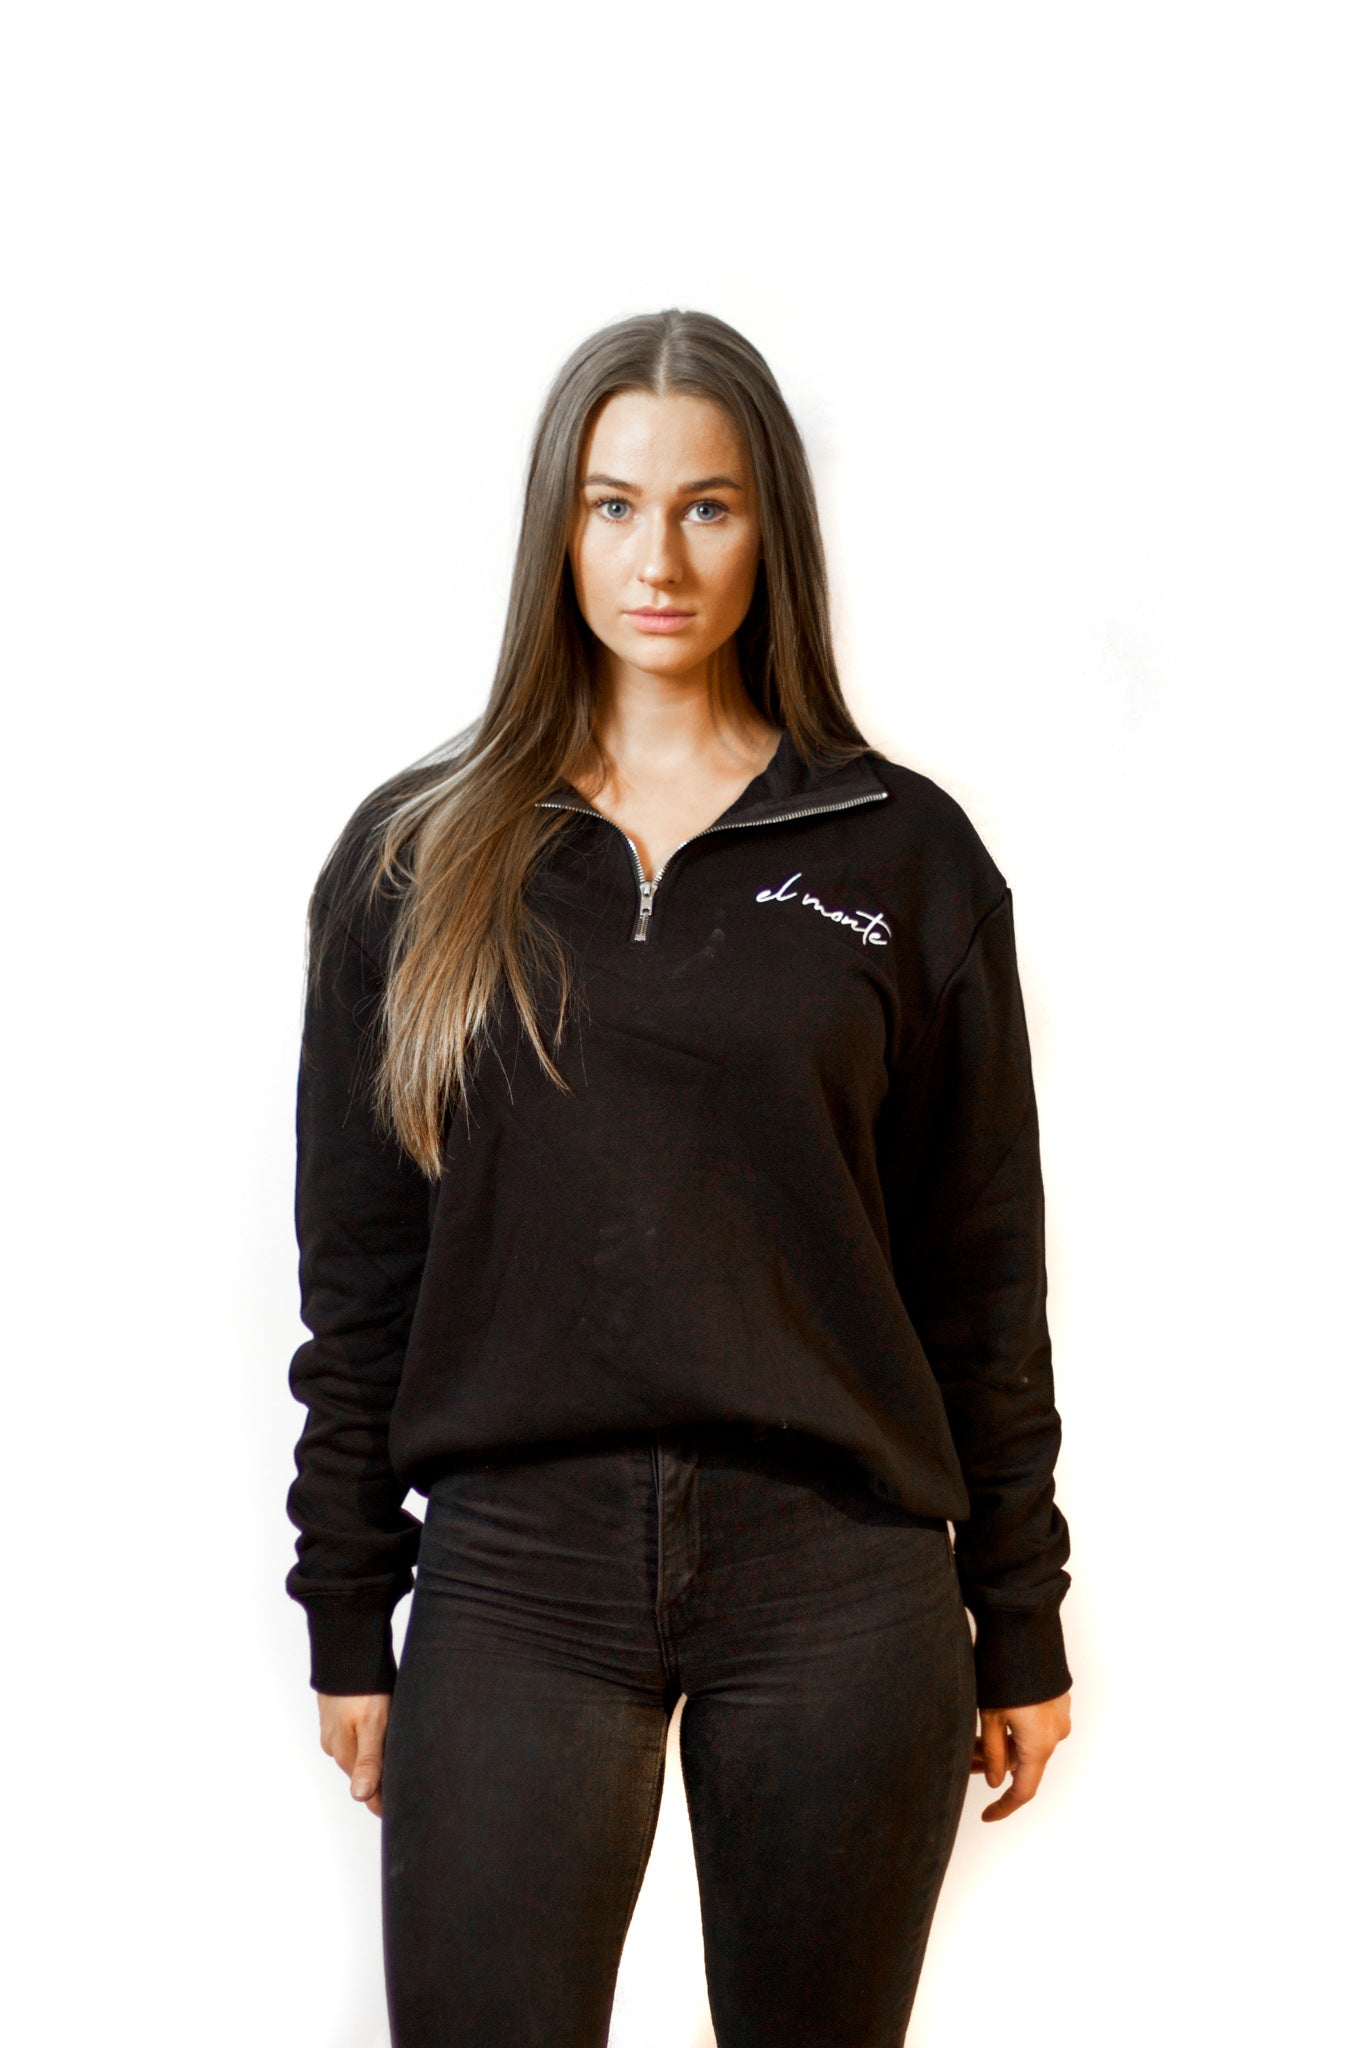 Comfortable Women slouch half zip sweatshirt perfect for those lazy dayss